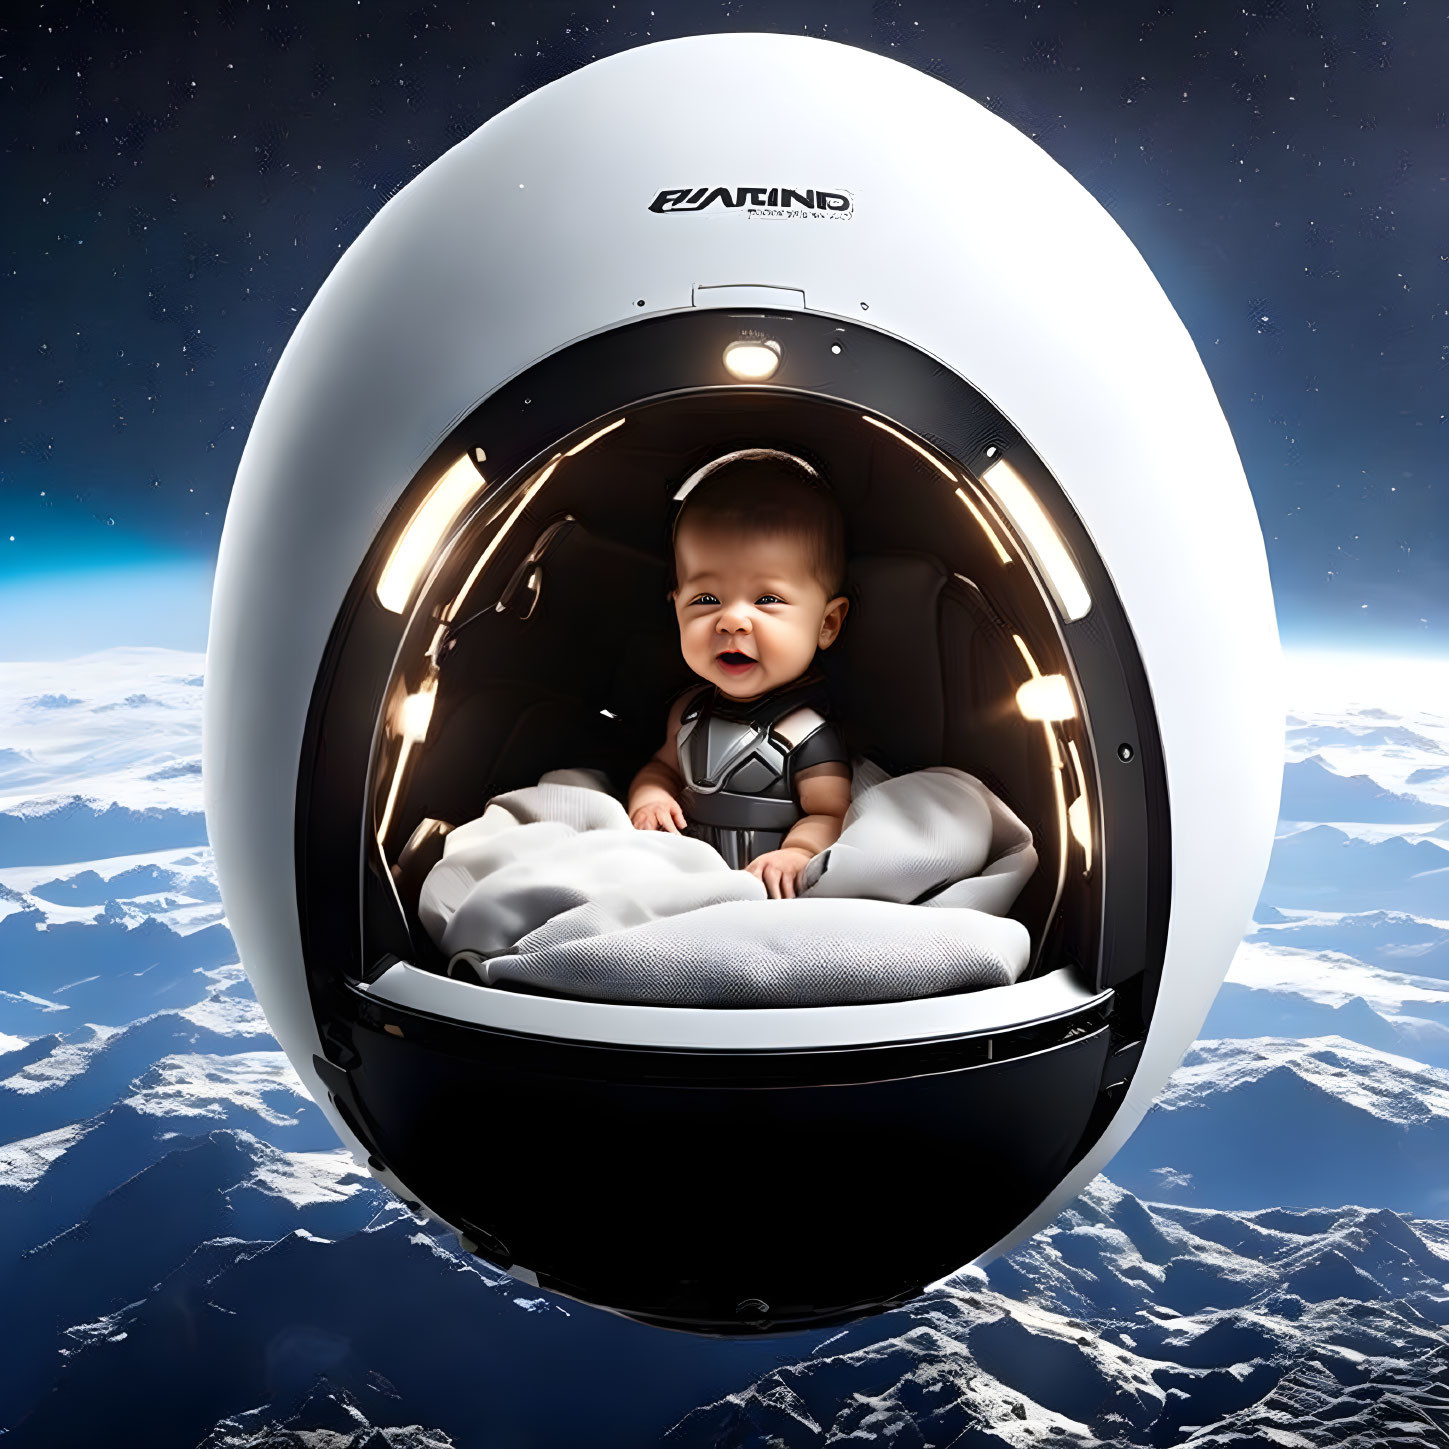 Smiling baby in futuristic crib floats above Earth with snowy mountains in space